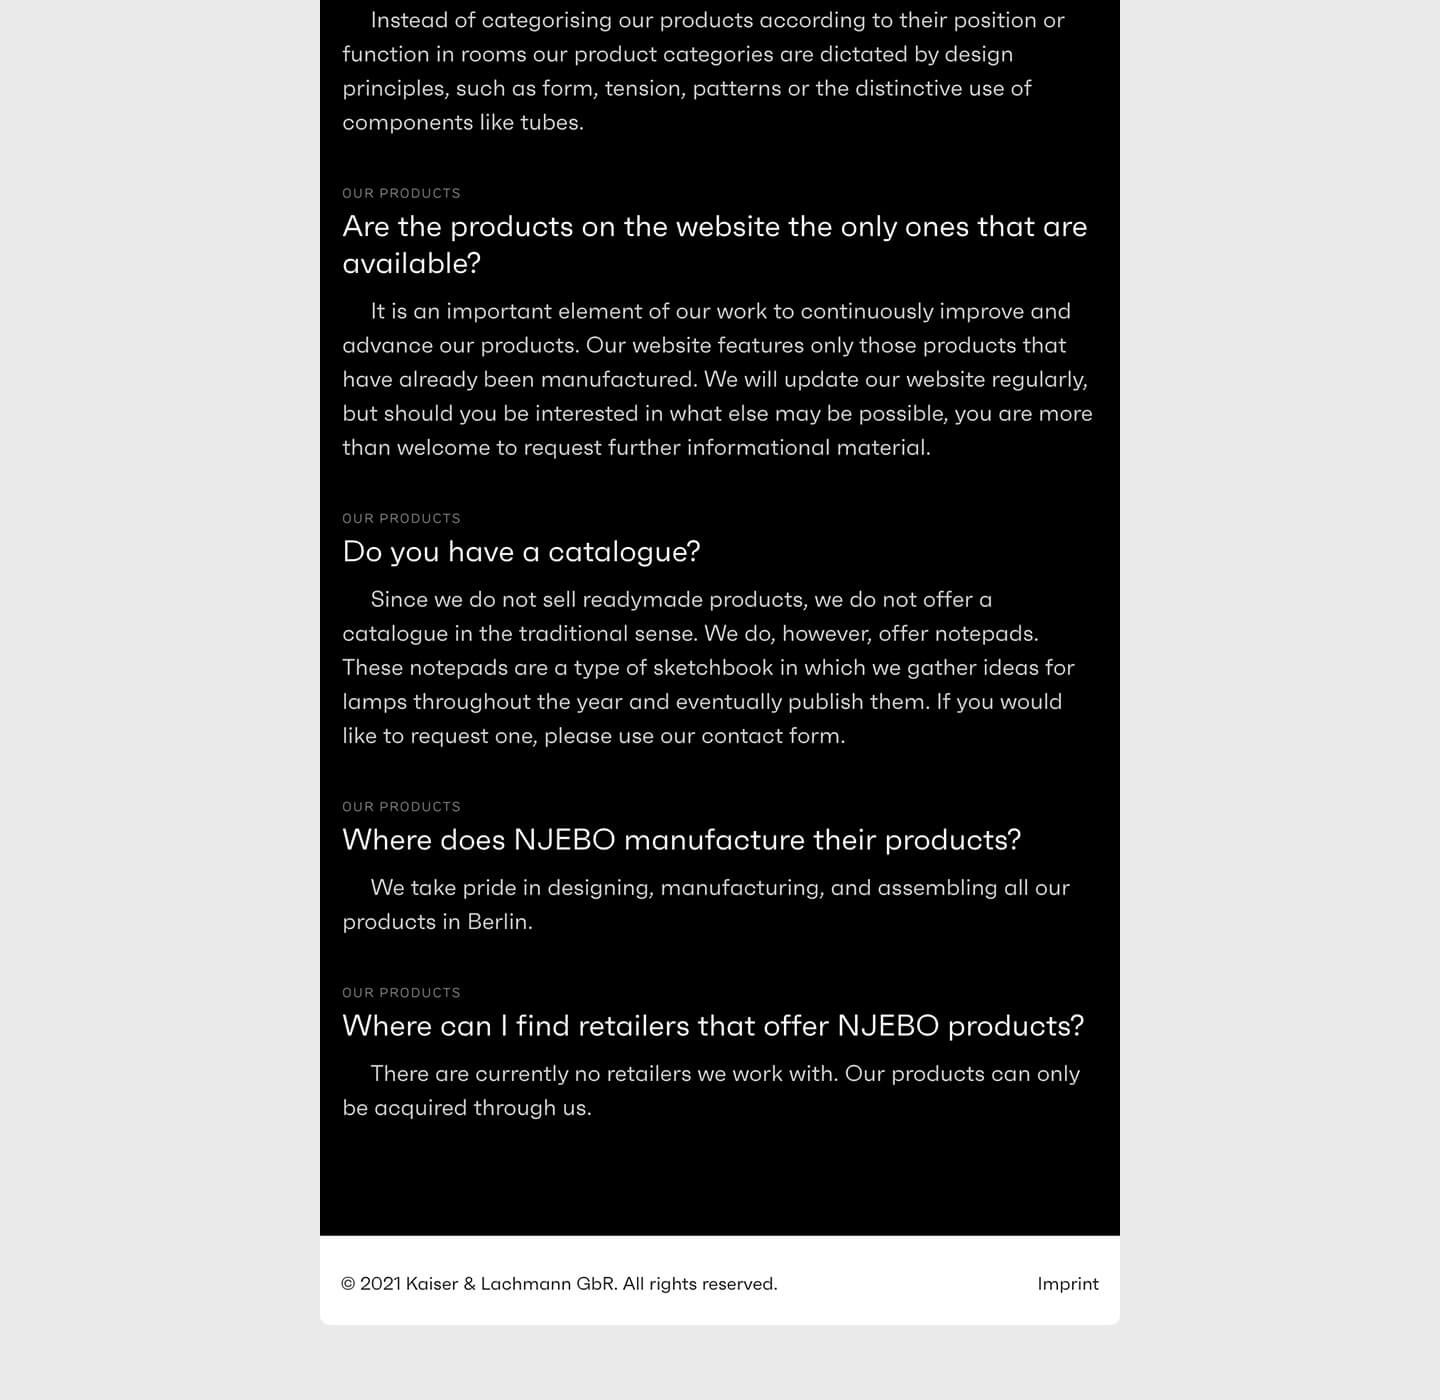 Image of Njebo website mobile view